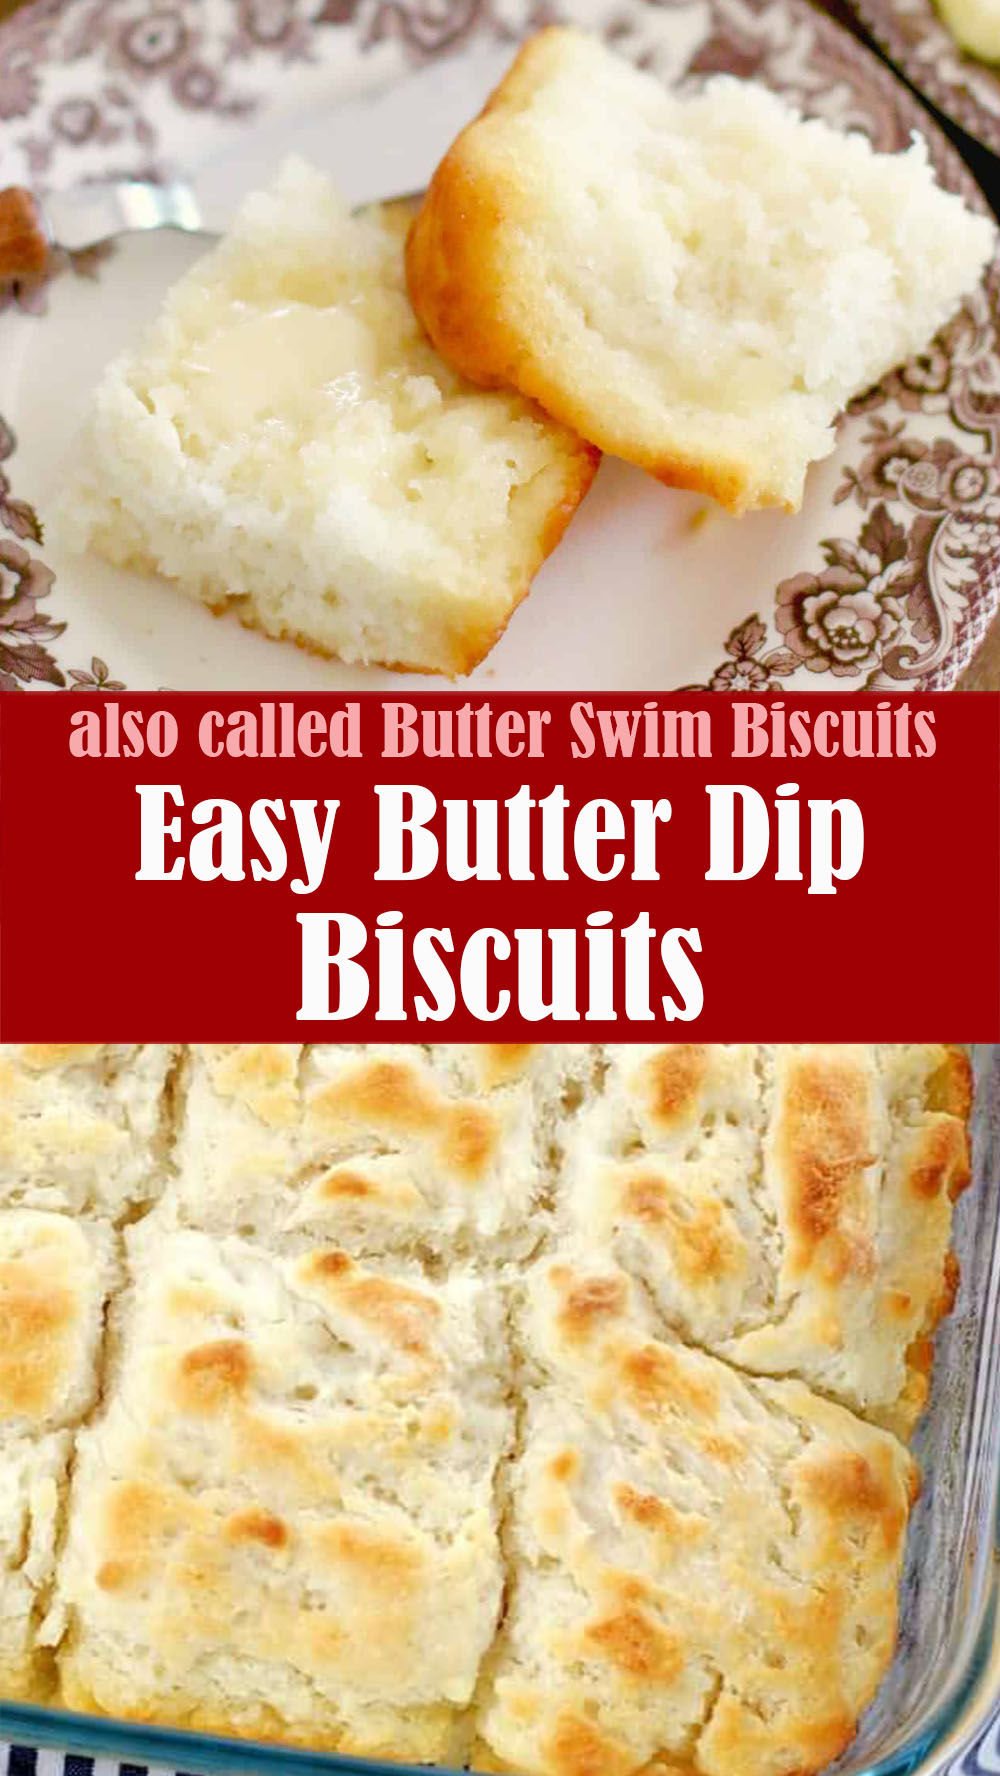 Butter Dip Biscuits, also called Butter Swim Biscuits, are fluffy, delicious homemade biscuits that are so easy to make. No biscuit cutter needed! Serve them alongside your favorite meals when you need an easy and delicious side dish.